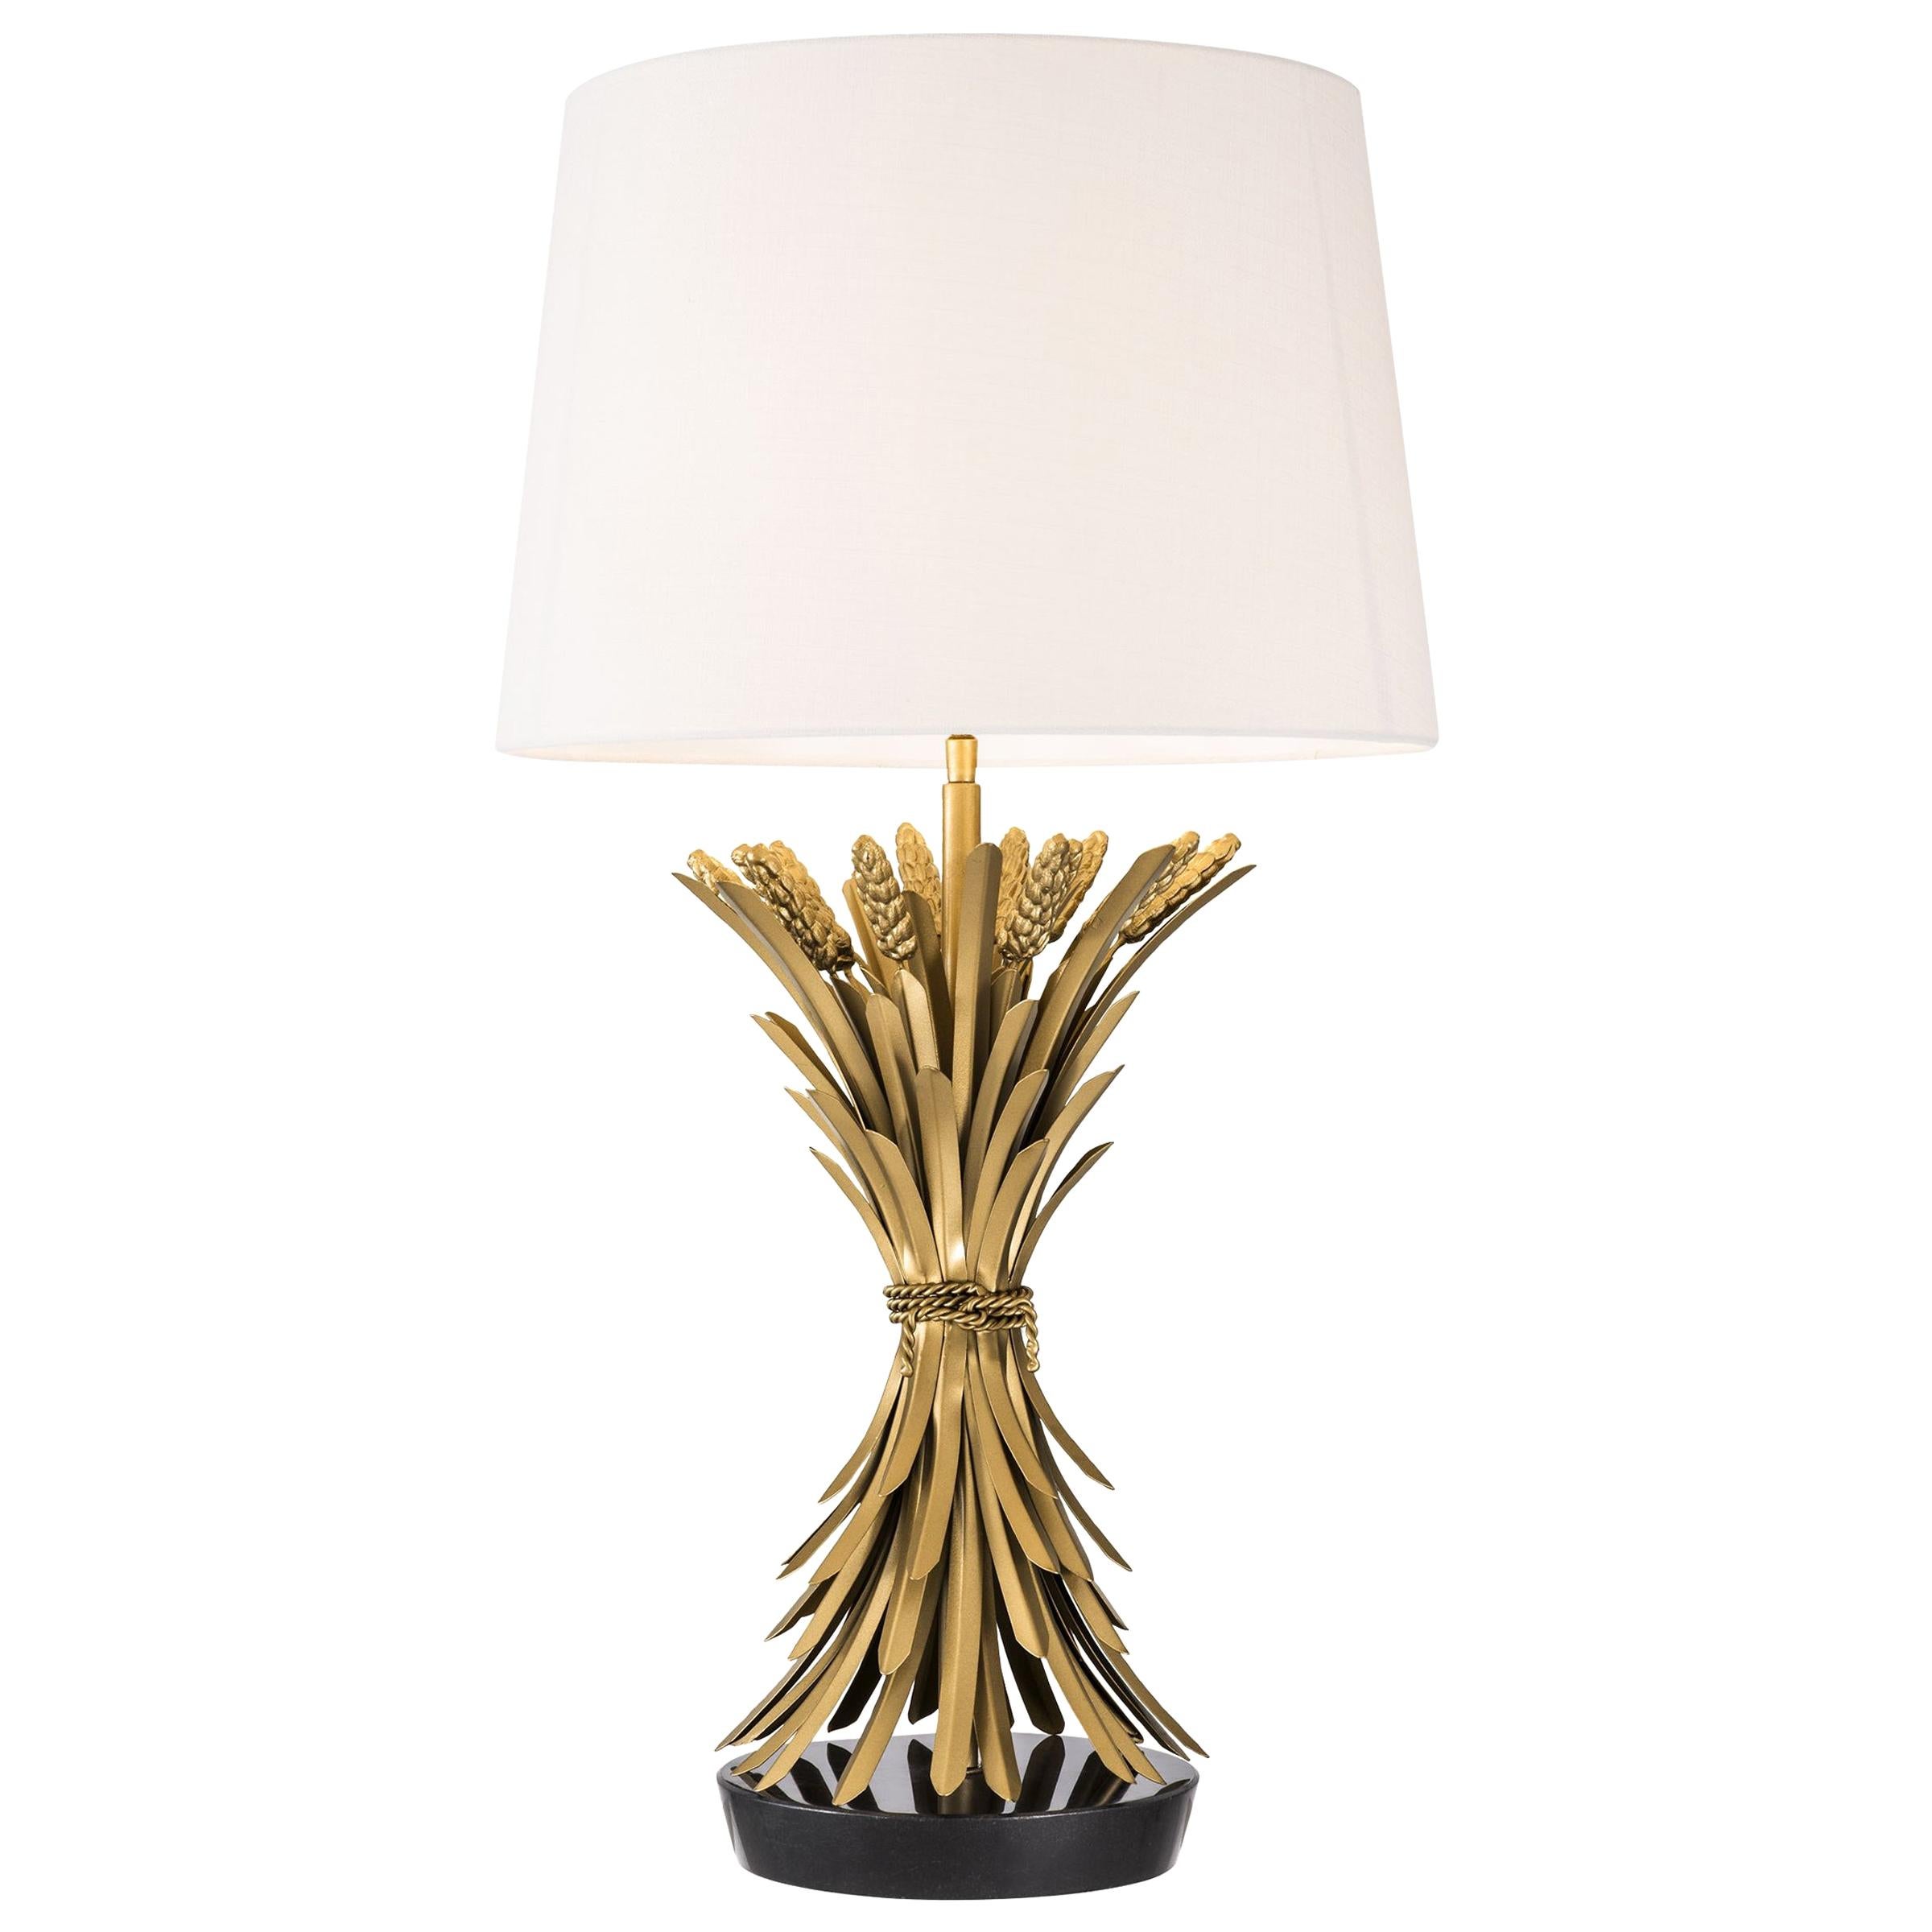 Wheat Sheaf Table Lamp For Sale